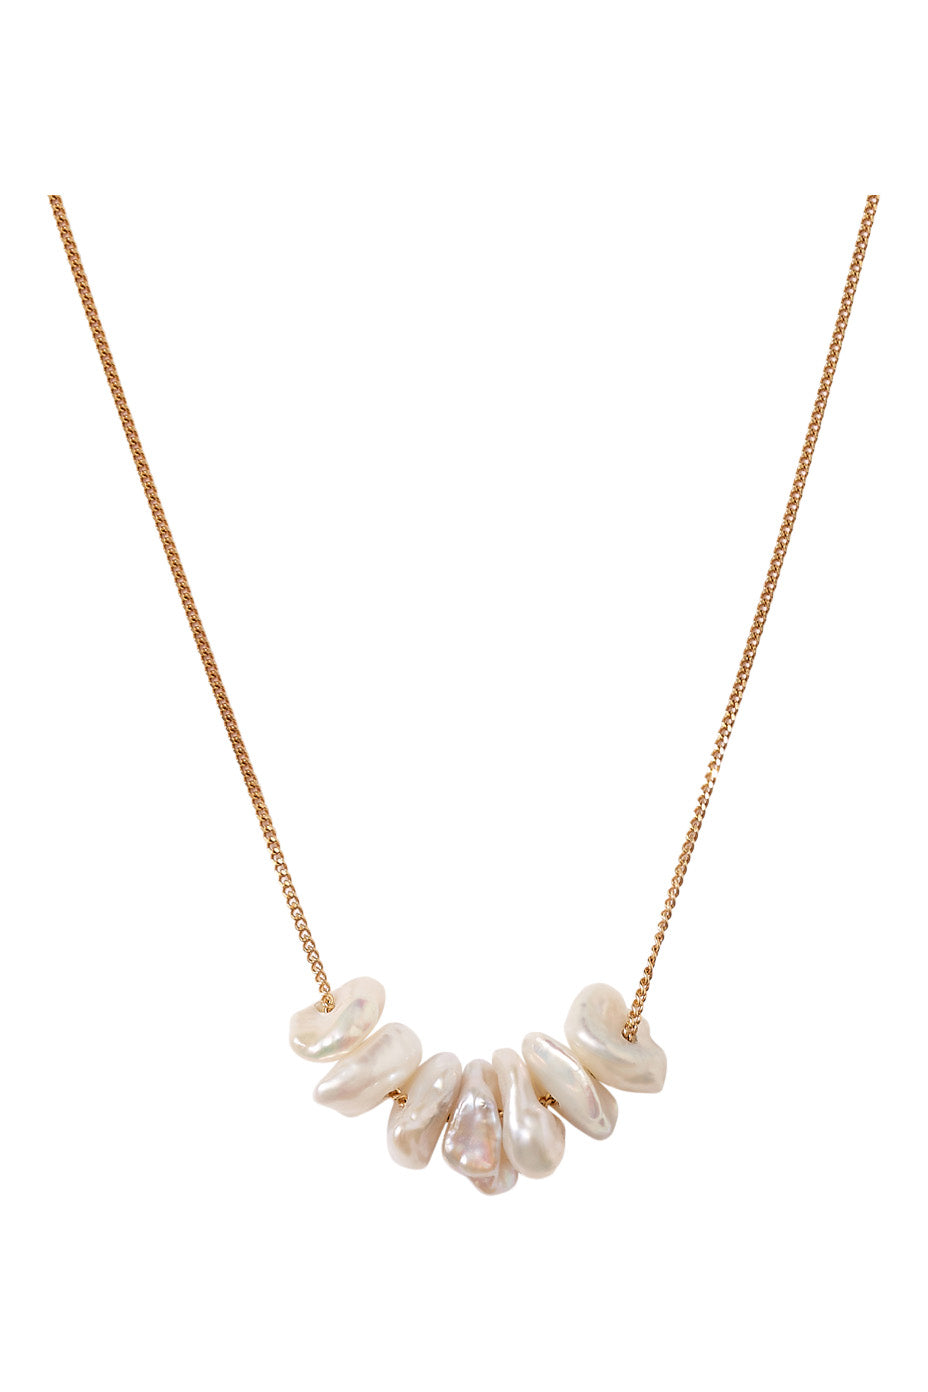 Chan Luu Gold Anini Necklace in White Pearl